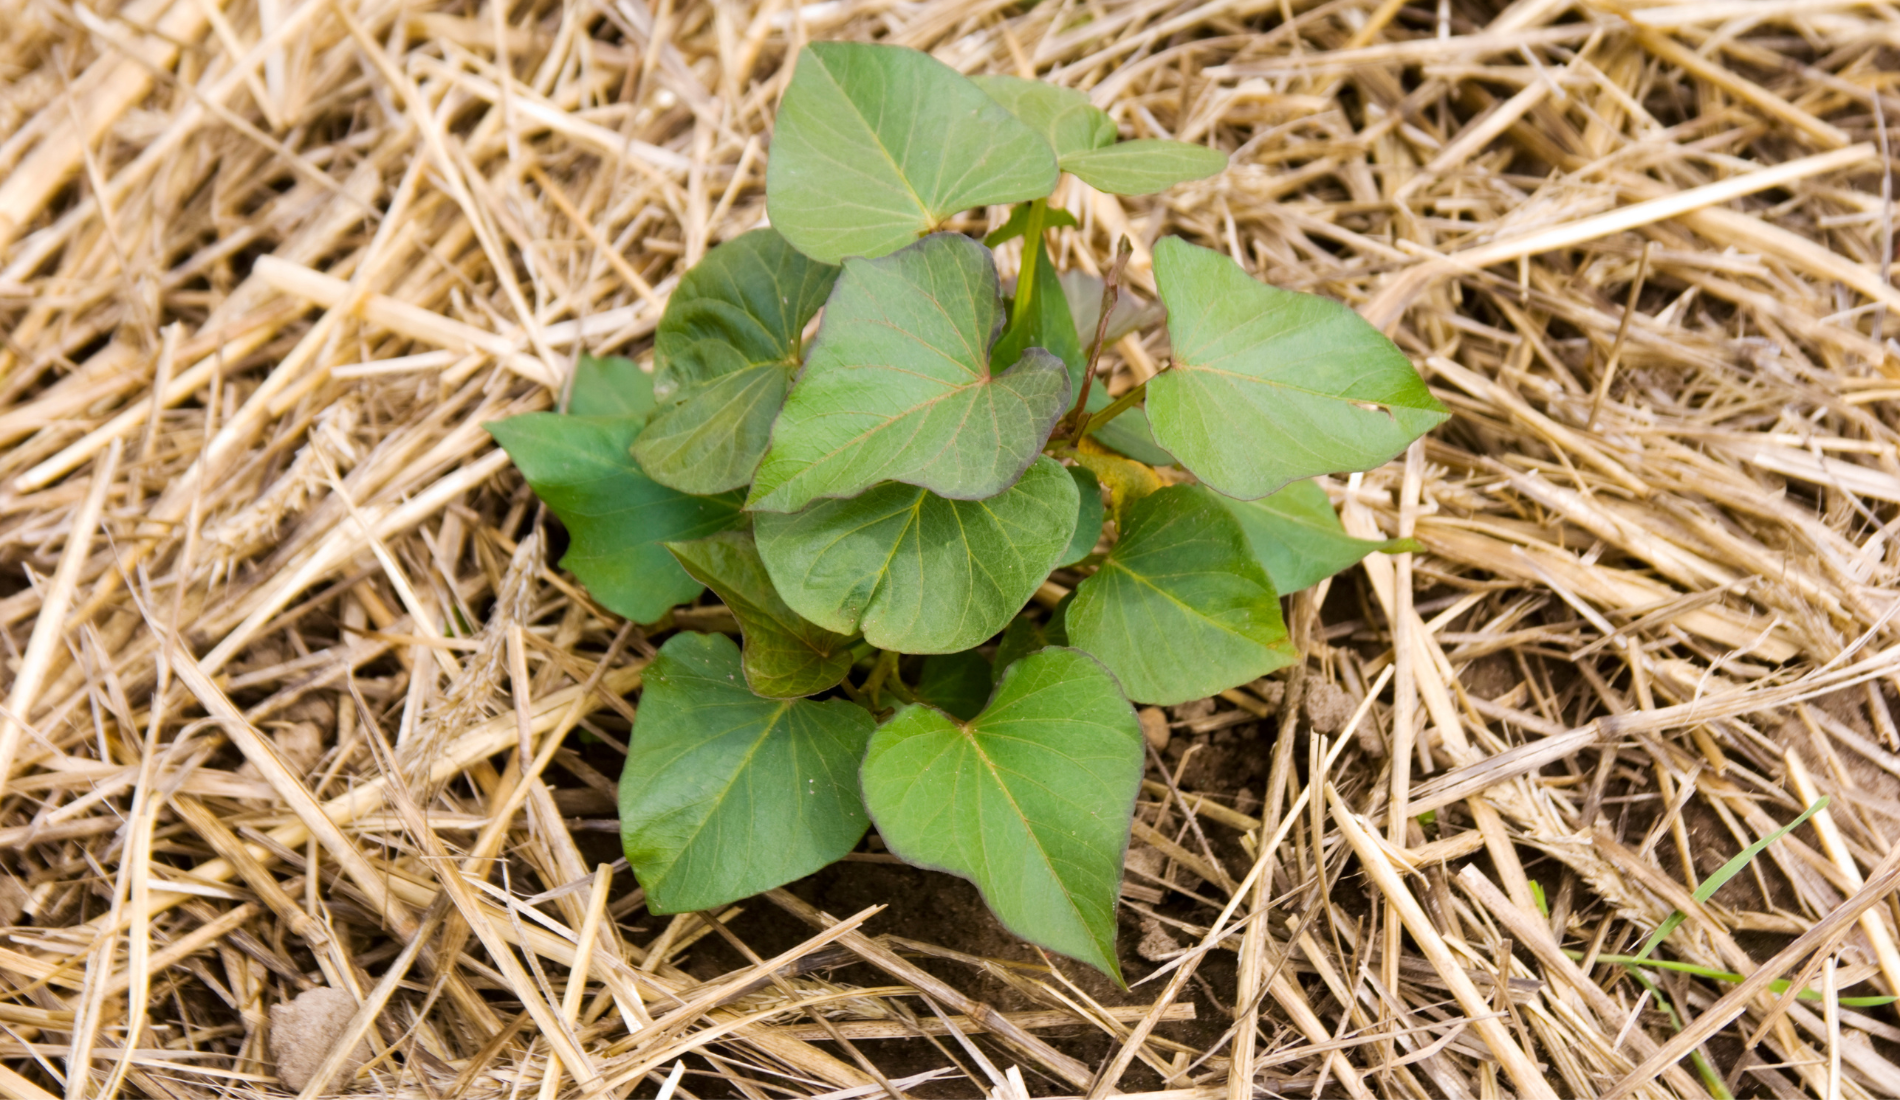 Sweet Potato Seedling Surrounded by Straw Mulch